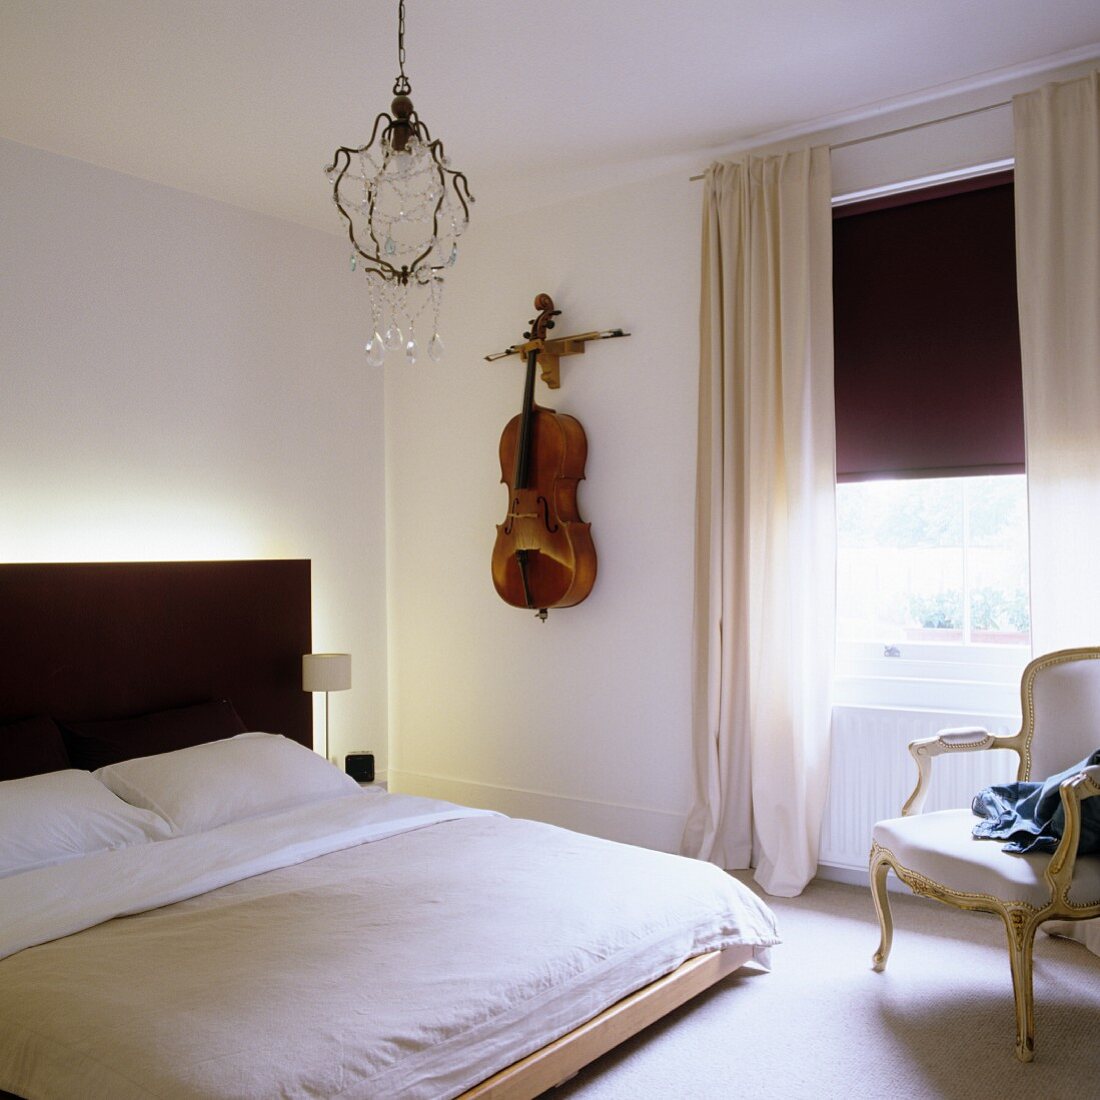 Modern bed with black, backlit headboard and cello decorating wall next to window with half-closed roller blind